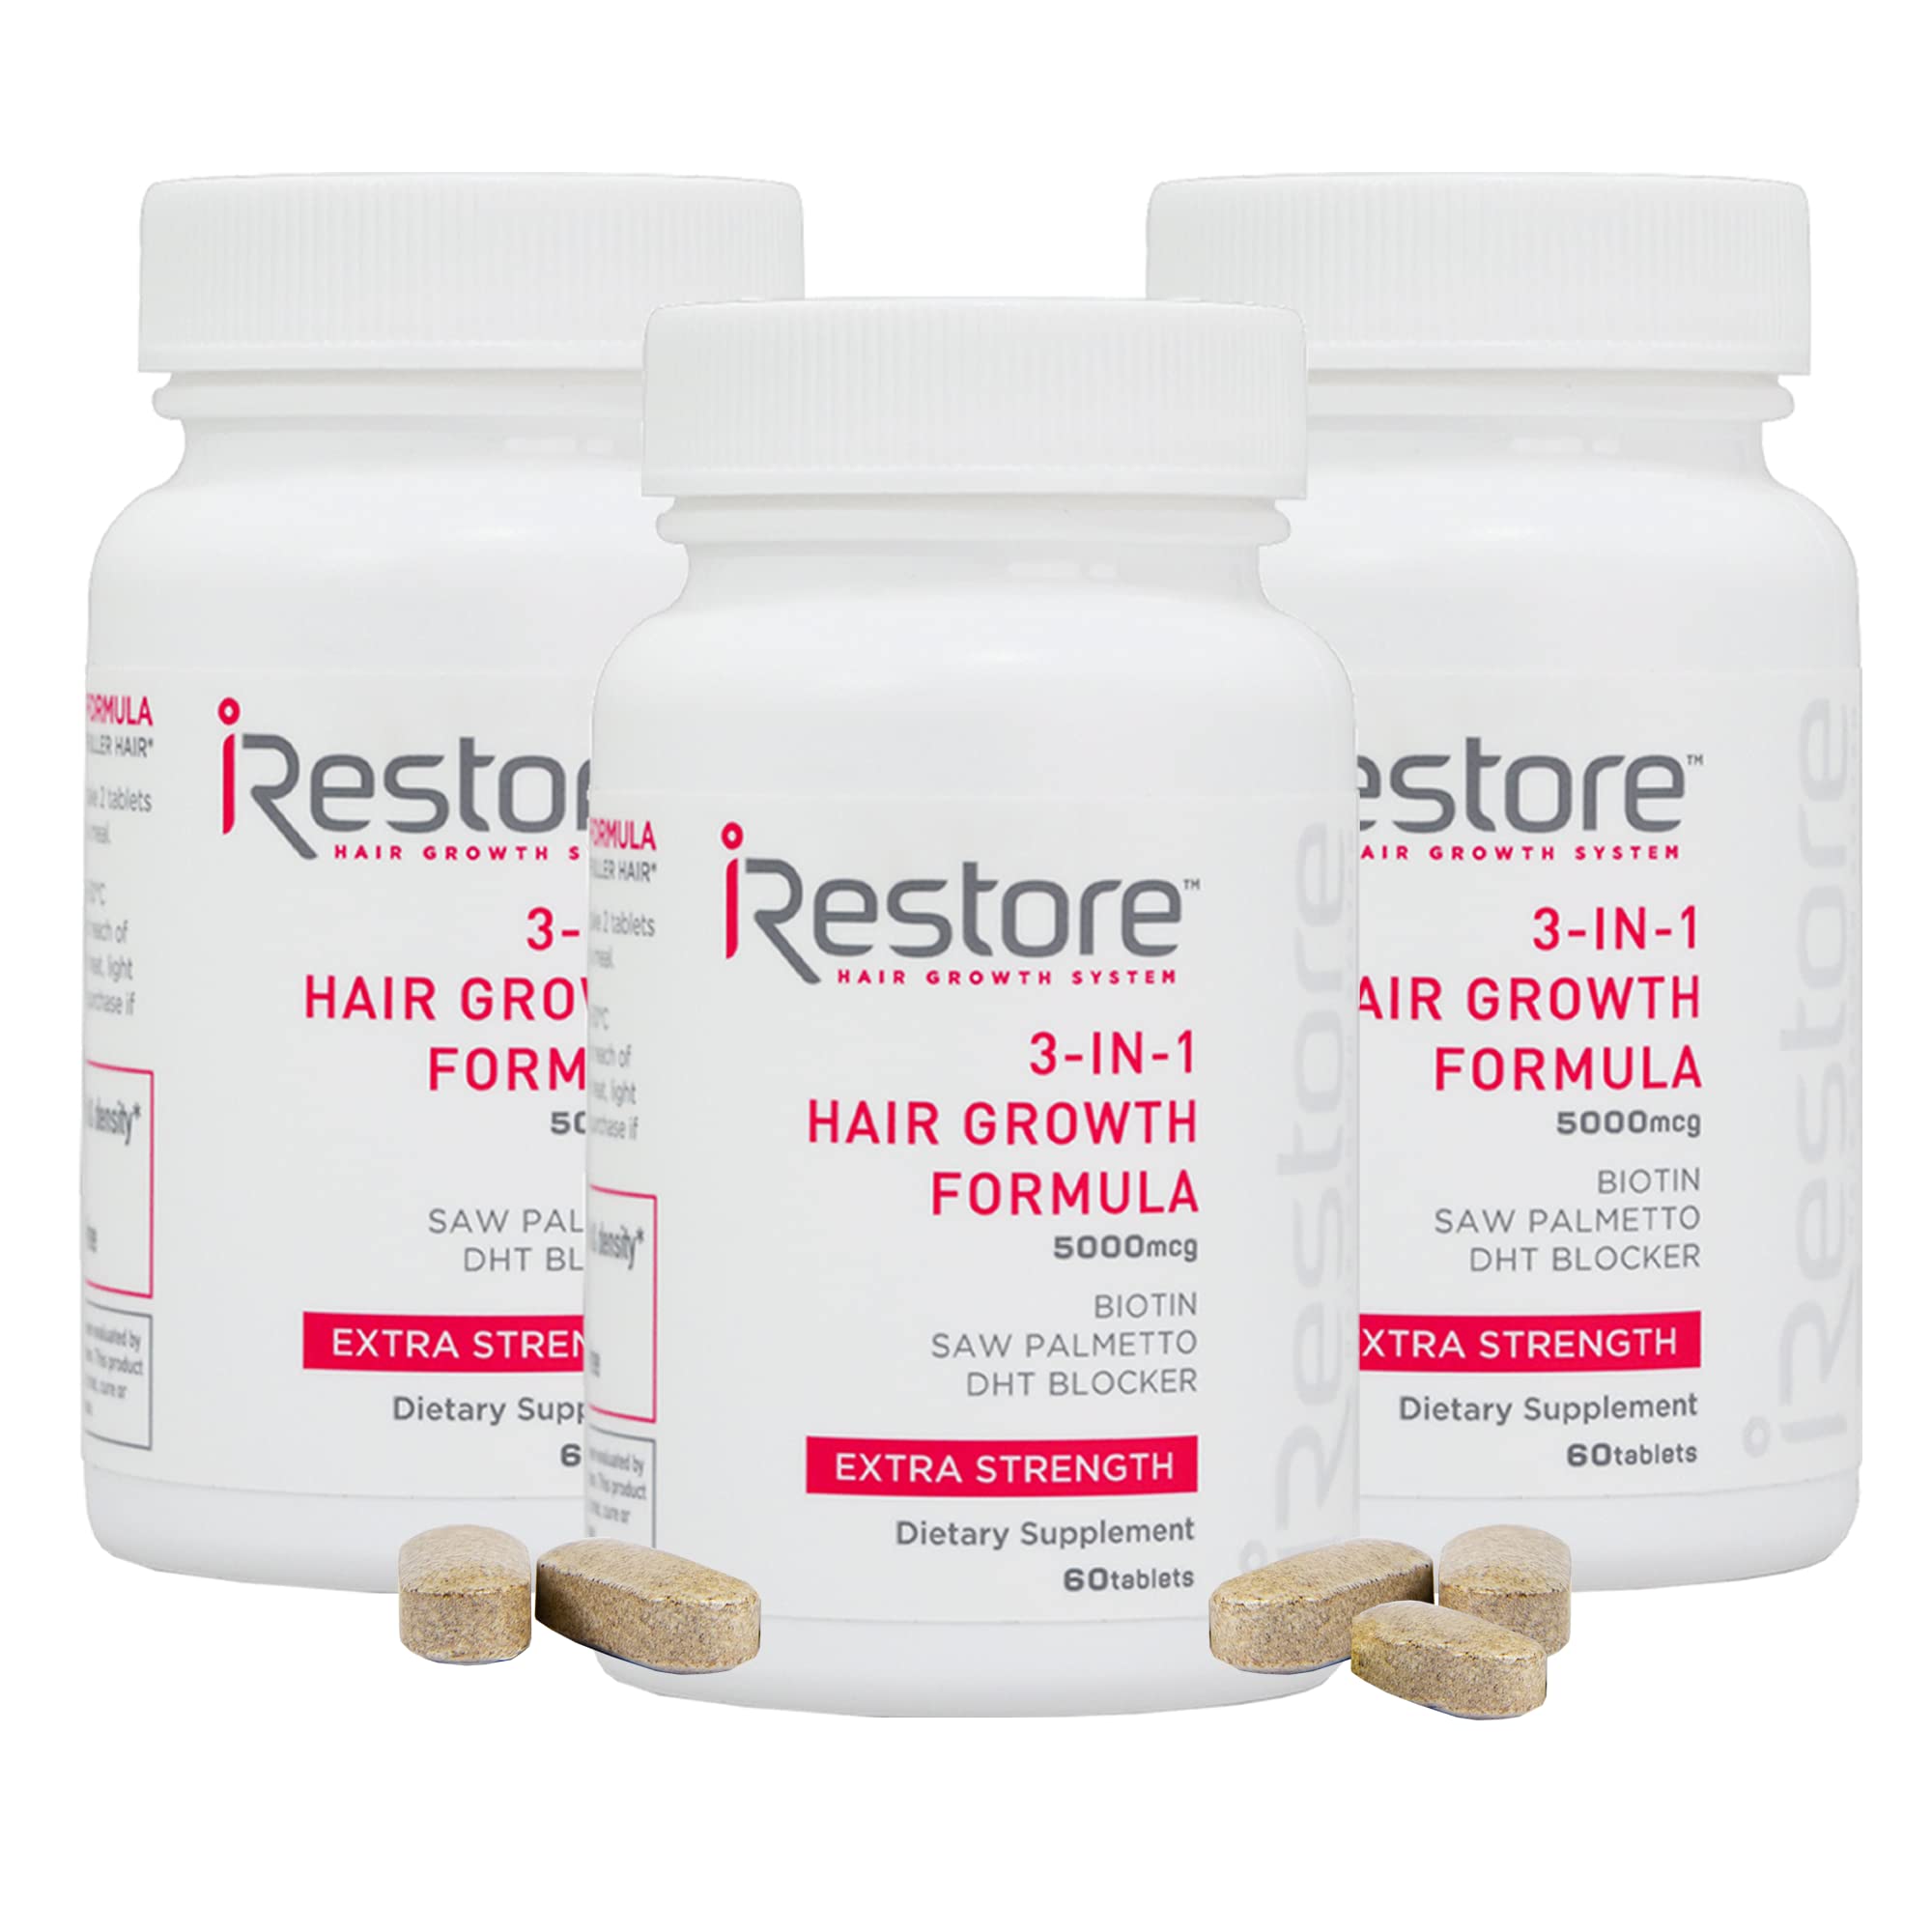 Book Cover iRestore 3-in-1 Hair Growth Supplement with Biotin, DHT Blocker, Saw Palmetto, and Other Extracts (60 Count) – 3 Pack